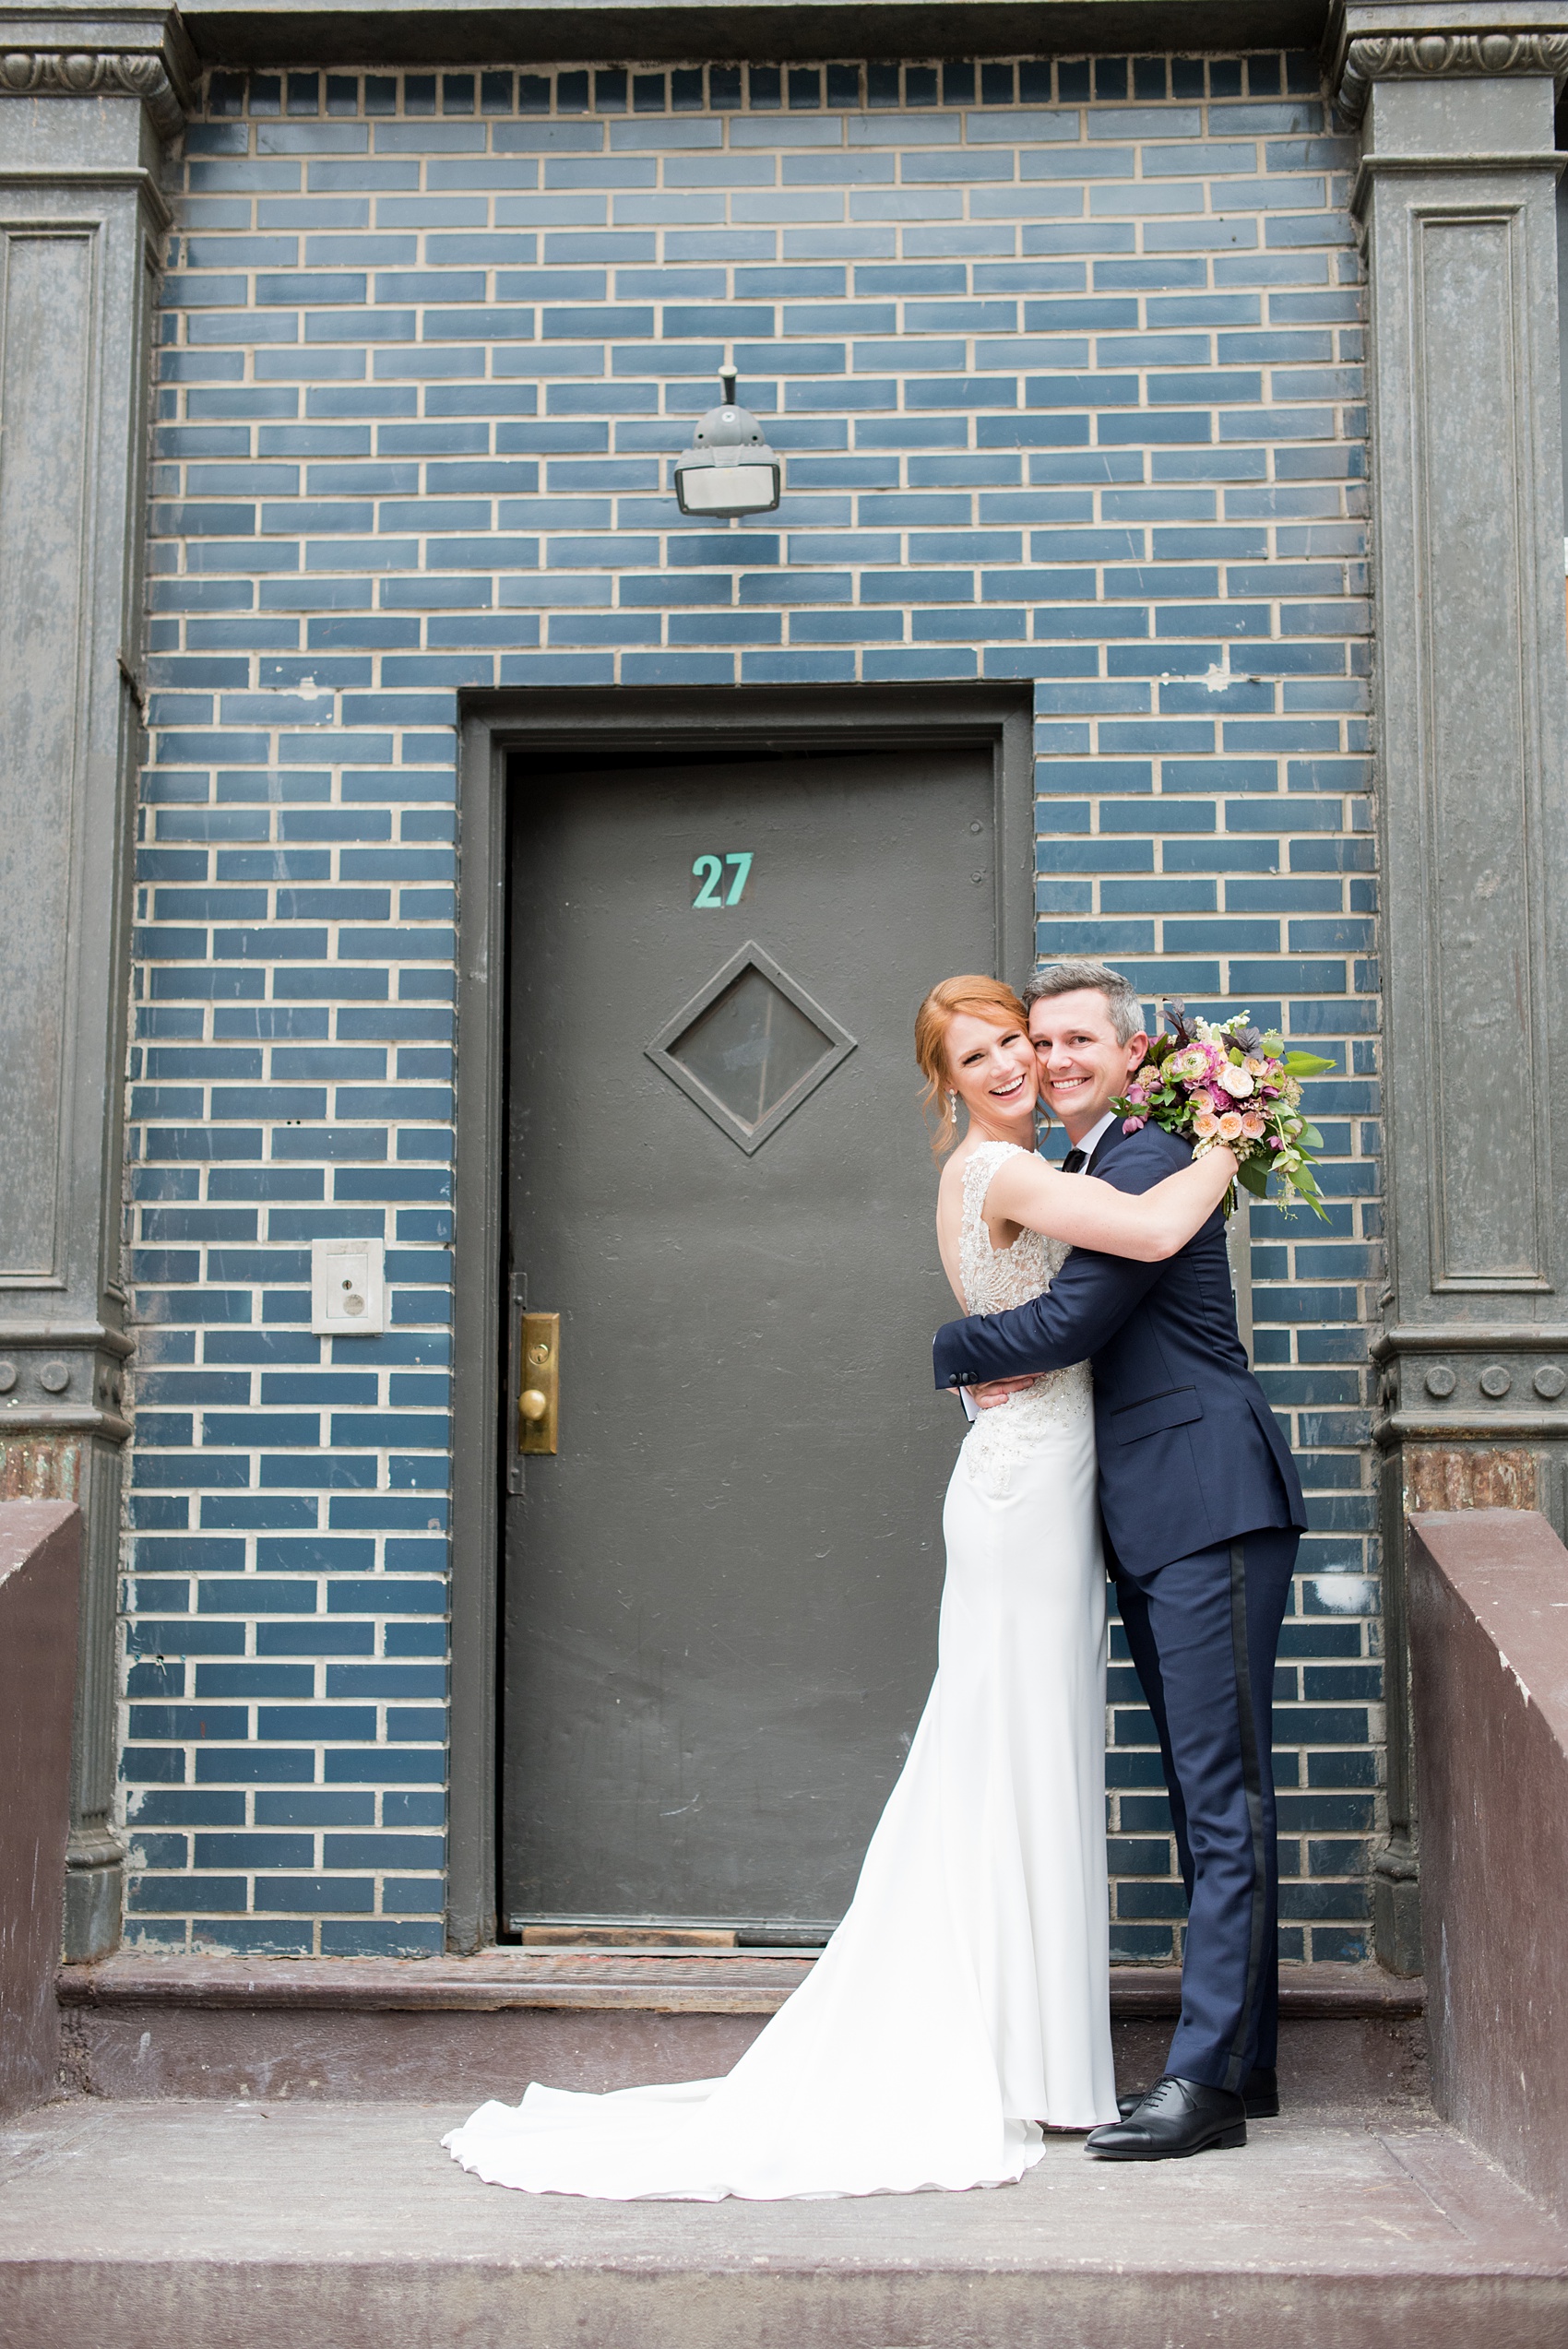 Photos of a NYC wedding venue, Tribeca Rooftop, by Mikkel Paige Photography. This ceremony and reception location has an outdoor space overlooking the Manhattan skyline. These pictures of the bride and groom will provide inspiration in New York! She wore a lace illusion gown with beading, her hair up, and carried a bouquet of fall flowers and he was in a navy suit. Click through for more details from this celebration! #TribecaRooftop #MikkelPaige #NYCwedding #NYCWeddingVenues #BrideandGroom 